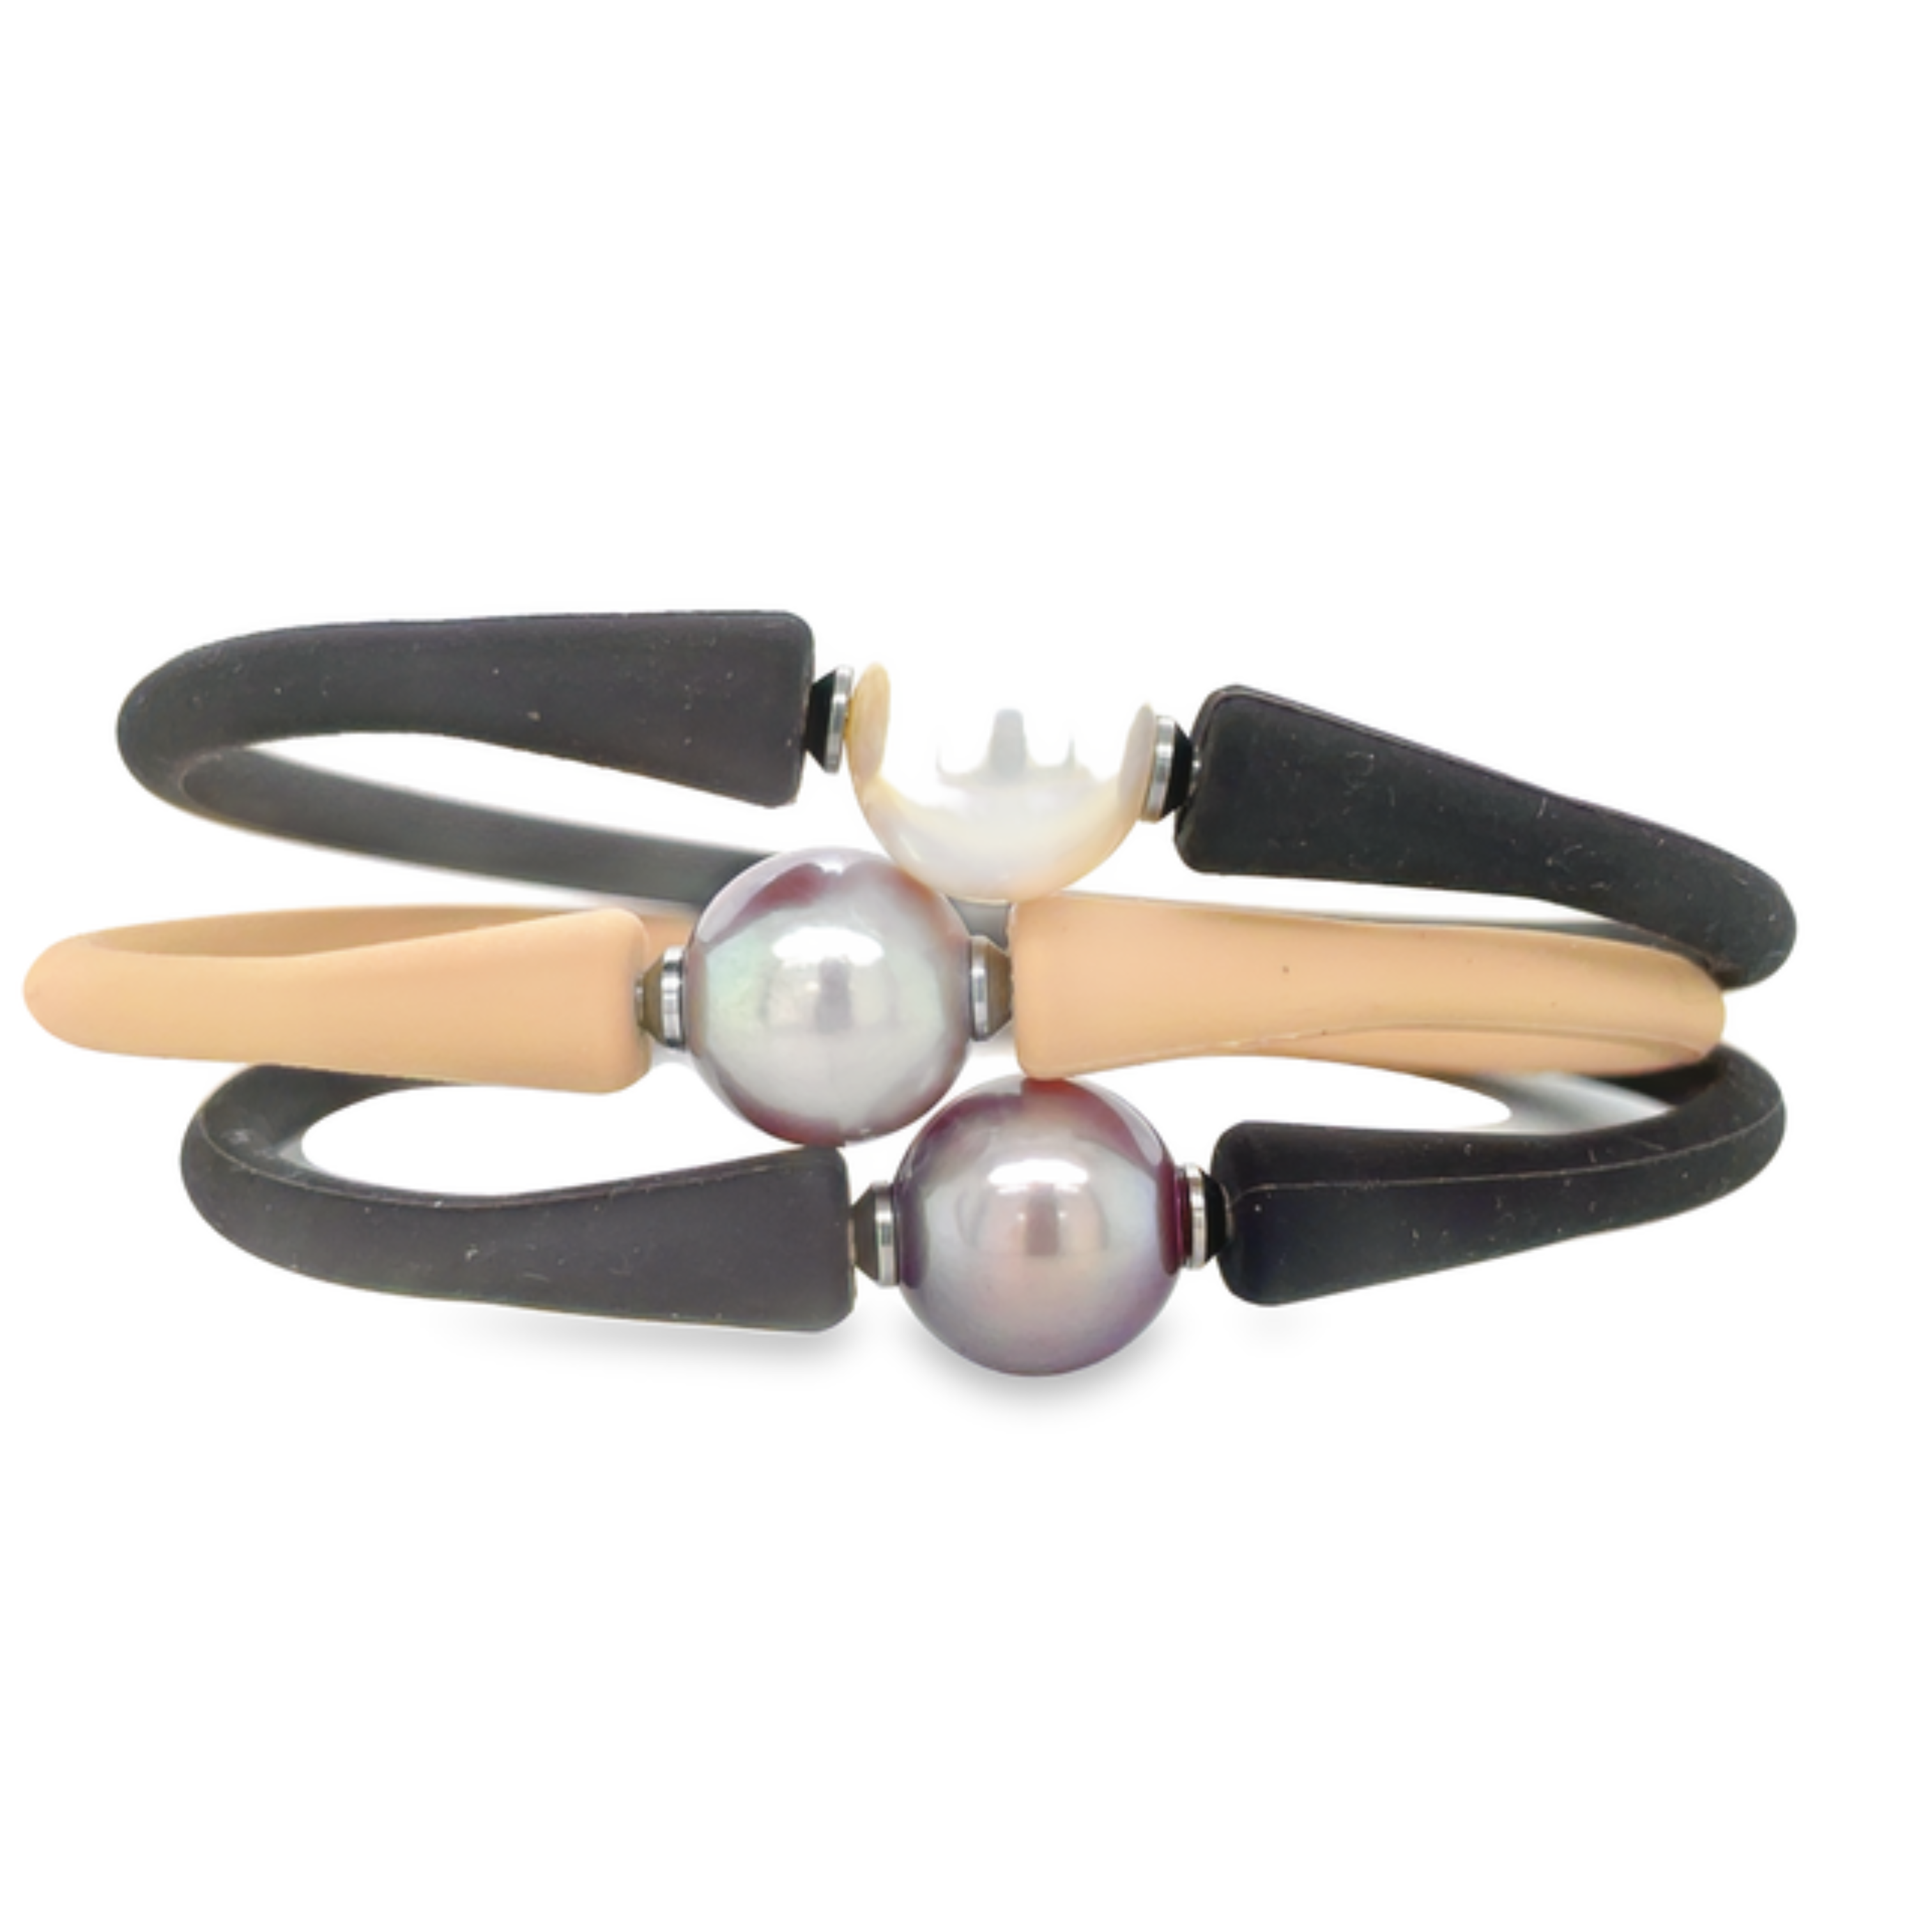 Edison pearls are freshwater pearl that are cultivated one pearl per mussel. This allows the mussel to direct all its attention at creating a single amazing pearl with South Sea pearl size.  Edison pearls are known for their intense, metallic luster & size.  11.30 mm  White color  Stretchable rubber bracelet   Stainless steel holders   Price per bracelet 